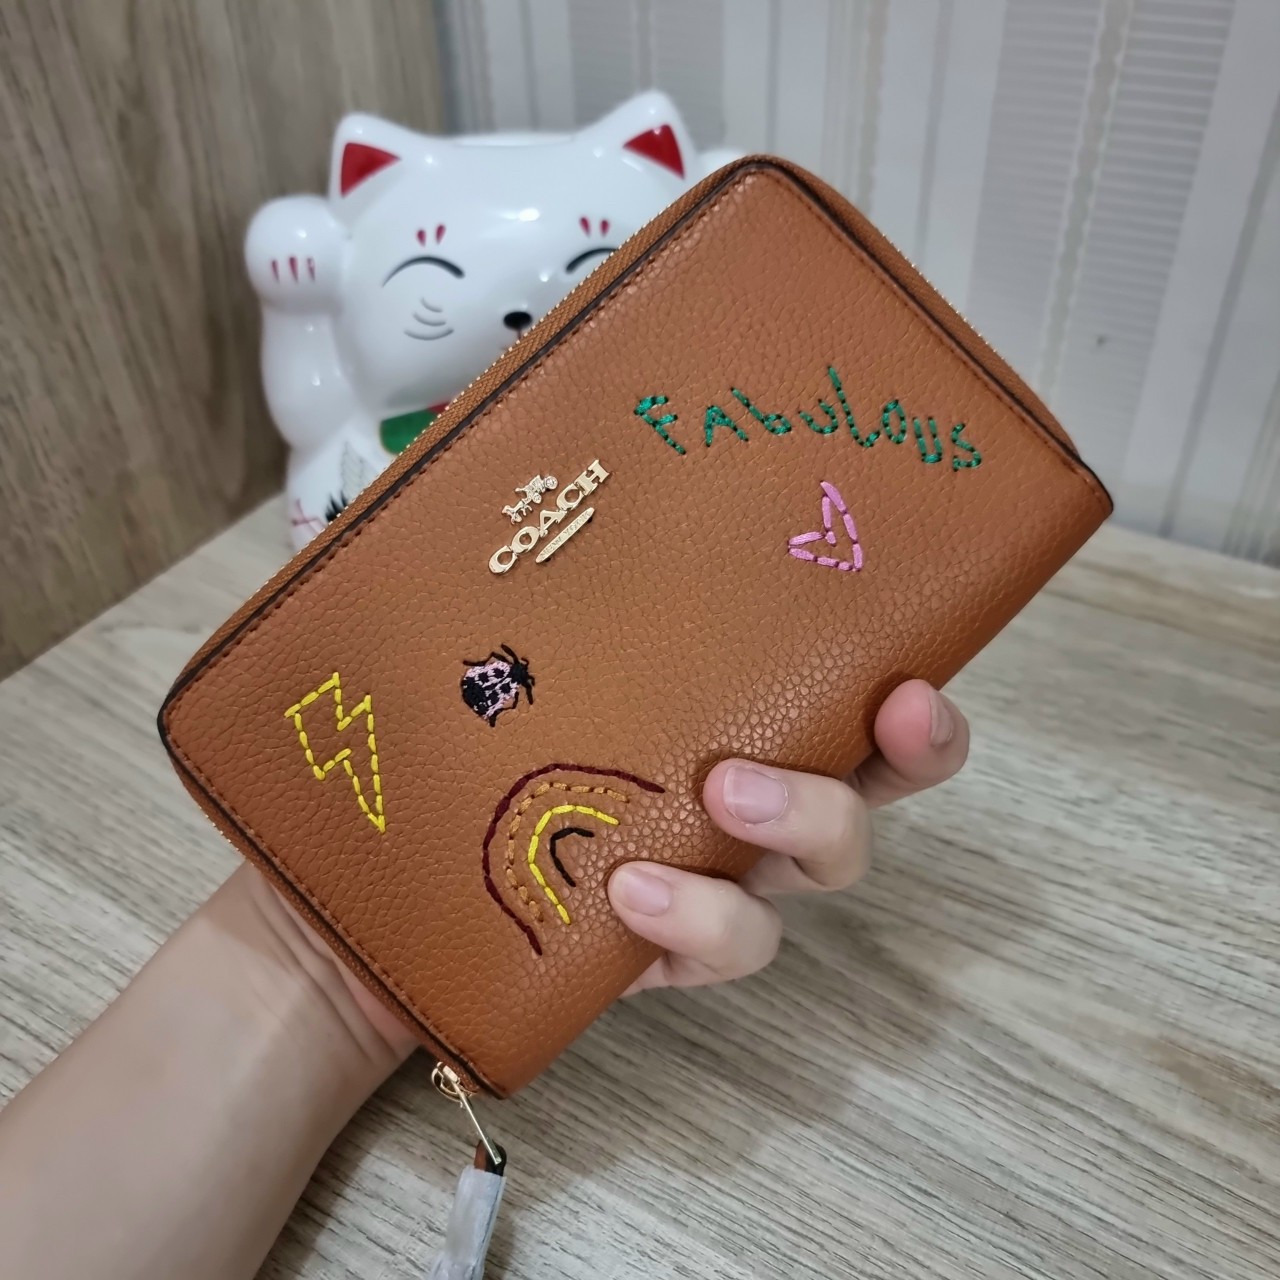 VÍ DÀI BROWN COACH MEDIUM ID ZIP WALLET WITH DIARY EMBROIDERY 1